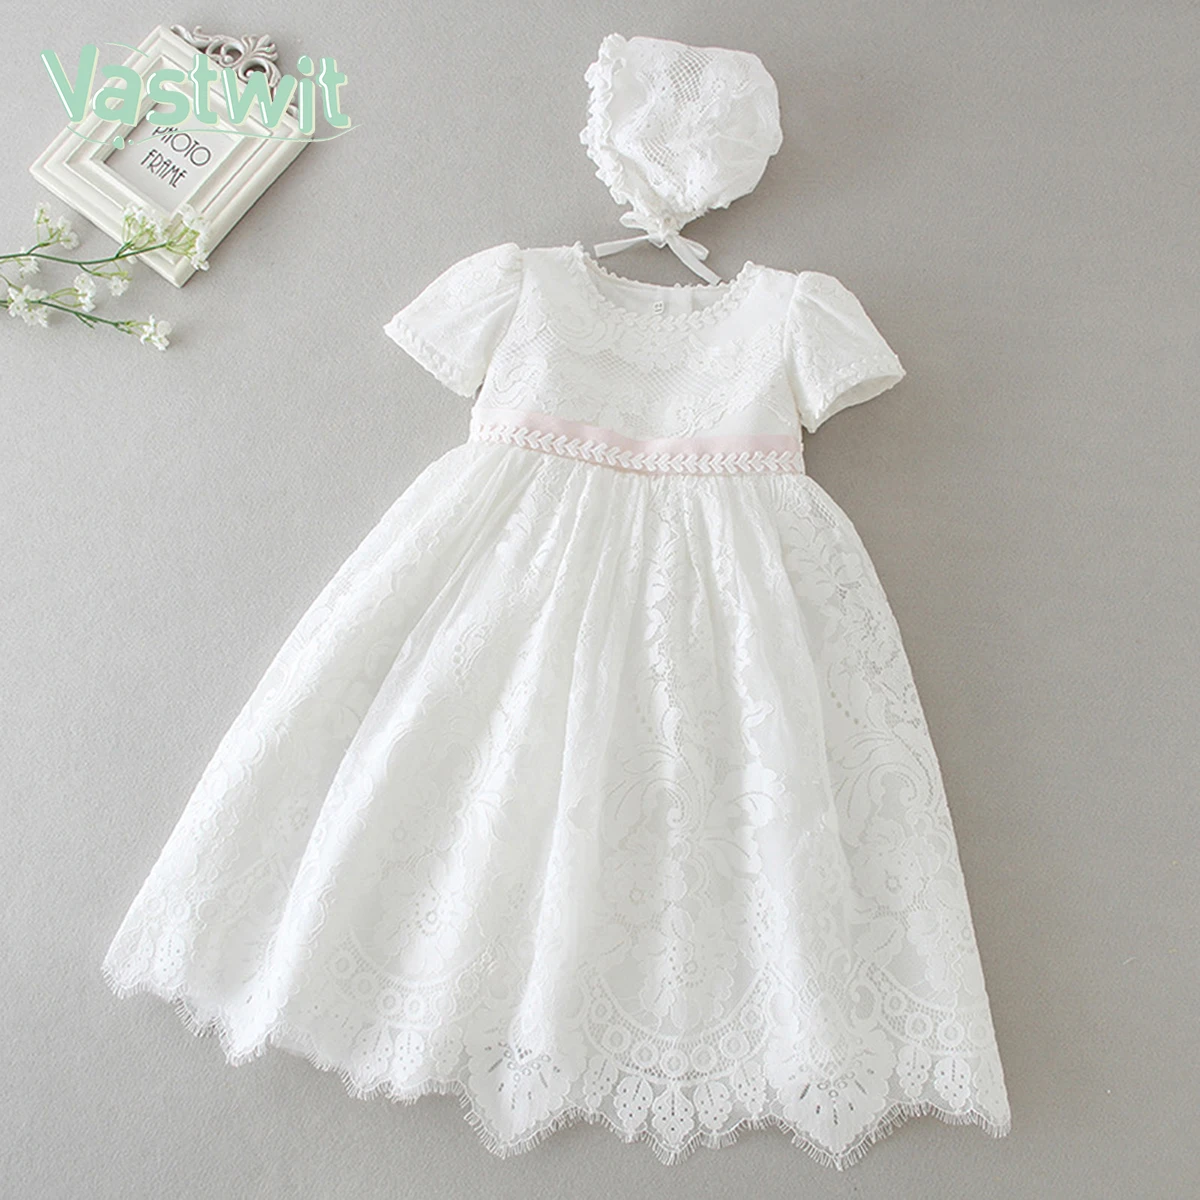 

Newborn Baby Girls Floral Lace Baptism Dress 1st First Birthday Princess Christening Gown+Bonnet Outfit Baby Girl Party Vestidos